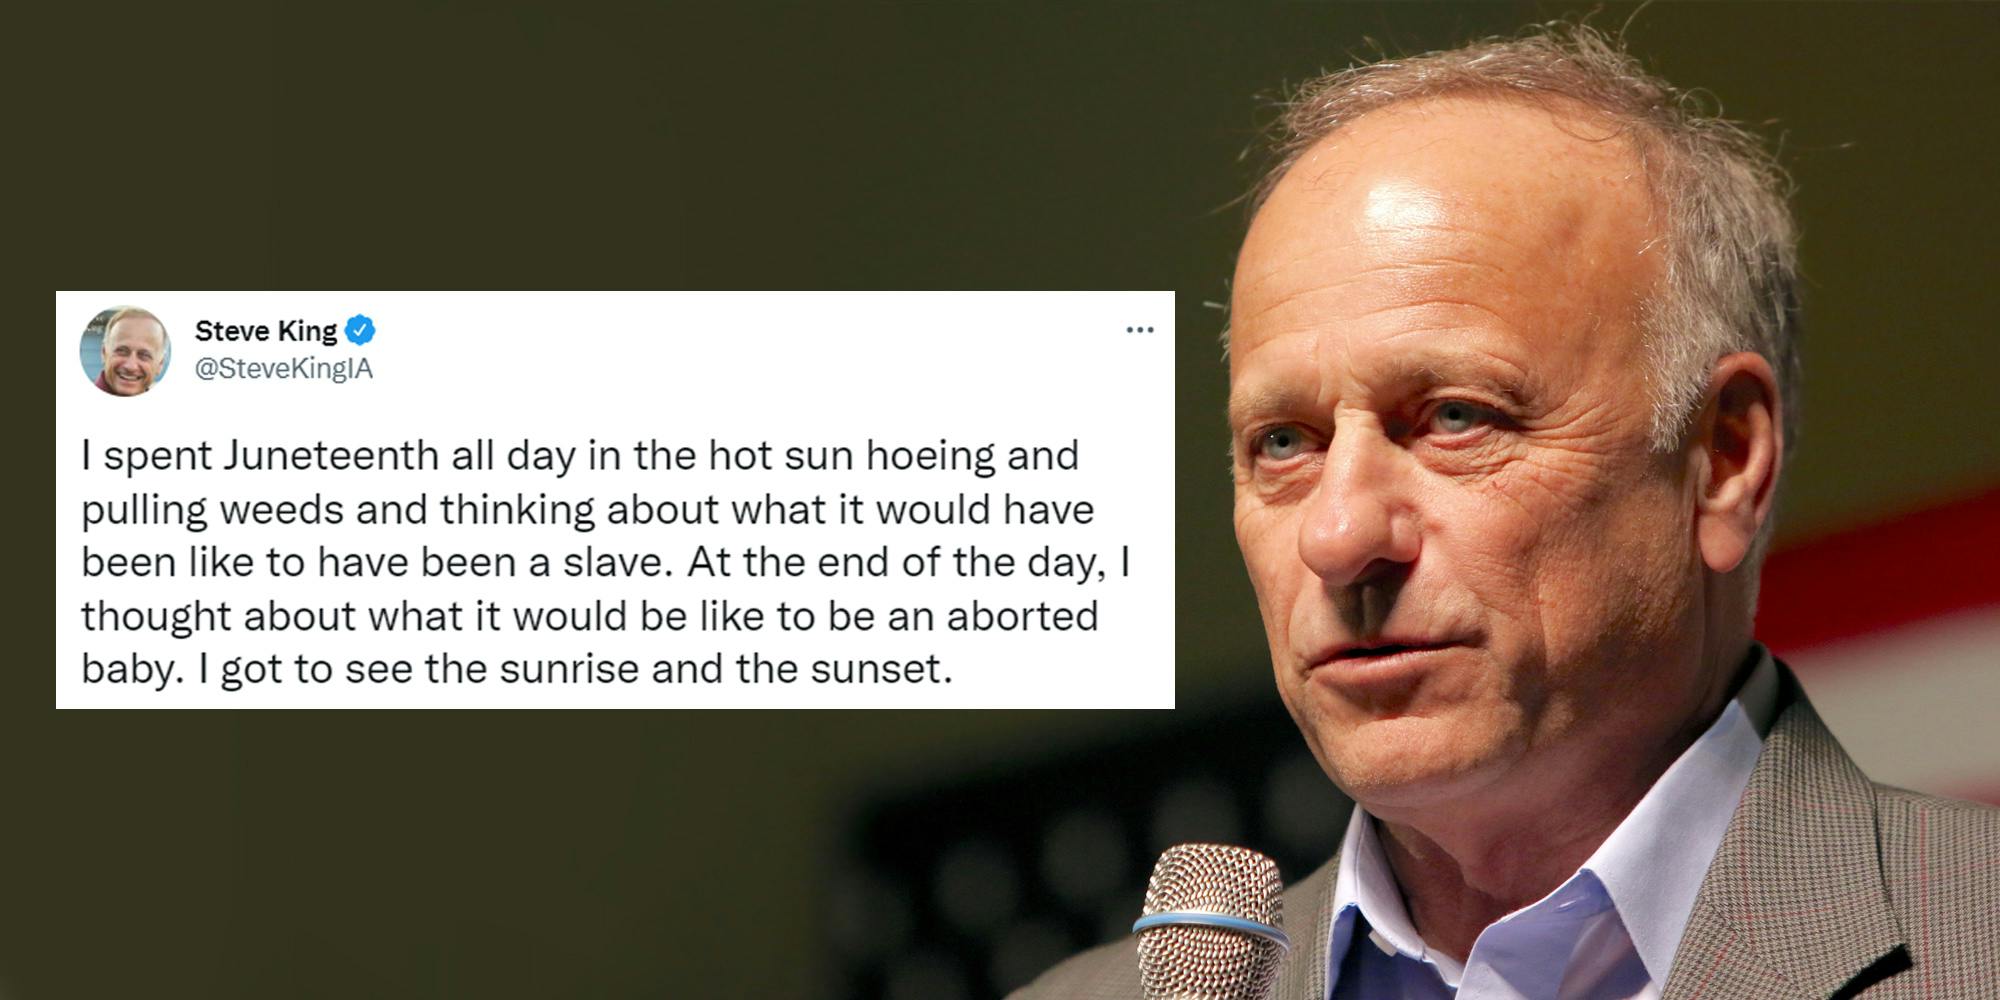 Steve King on right holding microphone over blurred American flag and olive green background with tweet by Steve King on left caption "I spent Juneteenth all day in the hot sun hoeing and pulling weeds and thinking about what it would have been like to have been a slave. At the end of the day, I thought about what it would be like to be an aborted baby. I got to see the sunrise and the sunset."